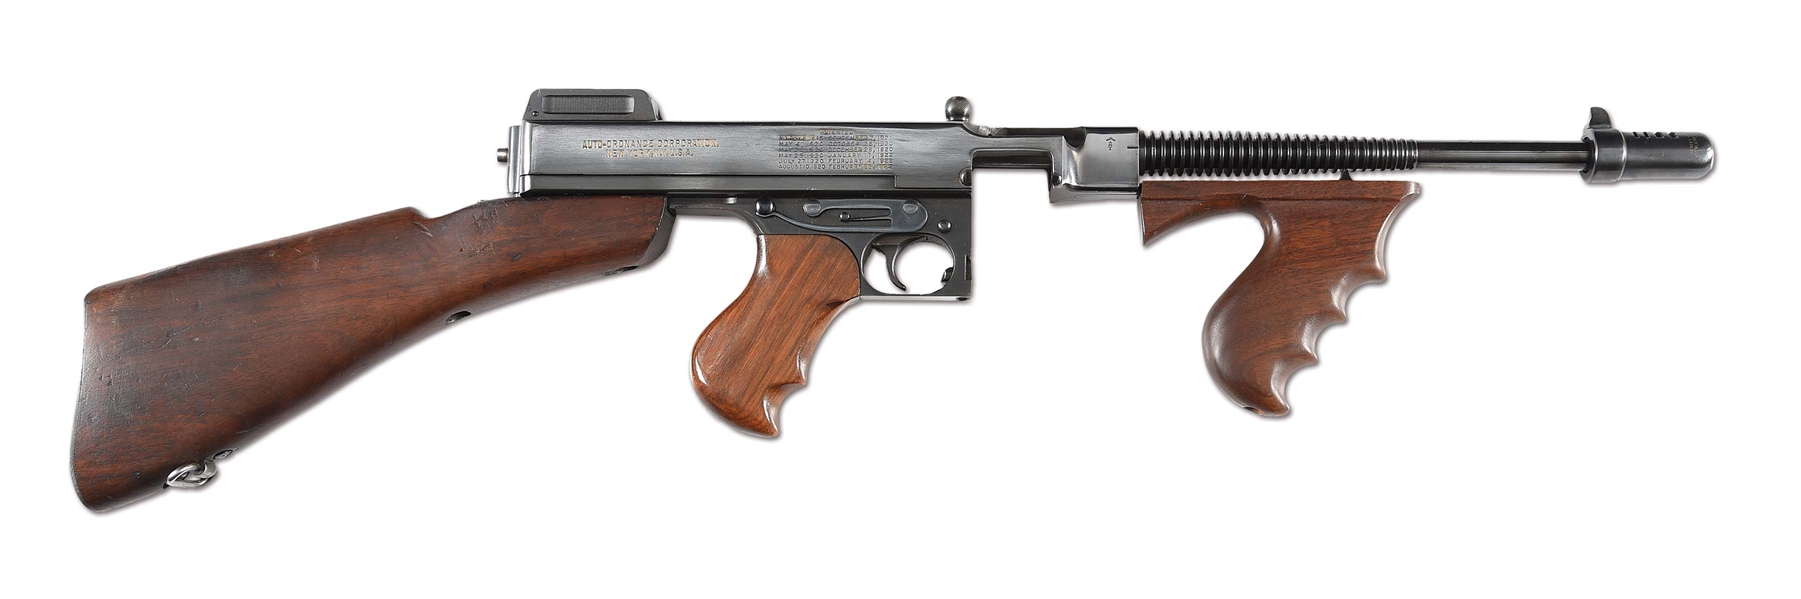 (N) VERY INTERESTING AND ATTRACTIVE NEW YORK ADDRESS SAVAGE MANUFACTURED 1928 THOMPSON MACHINE GUN WITH BROAD ARROW PROOF (CURIO AND RELIC).